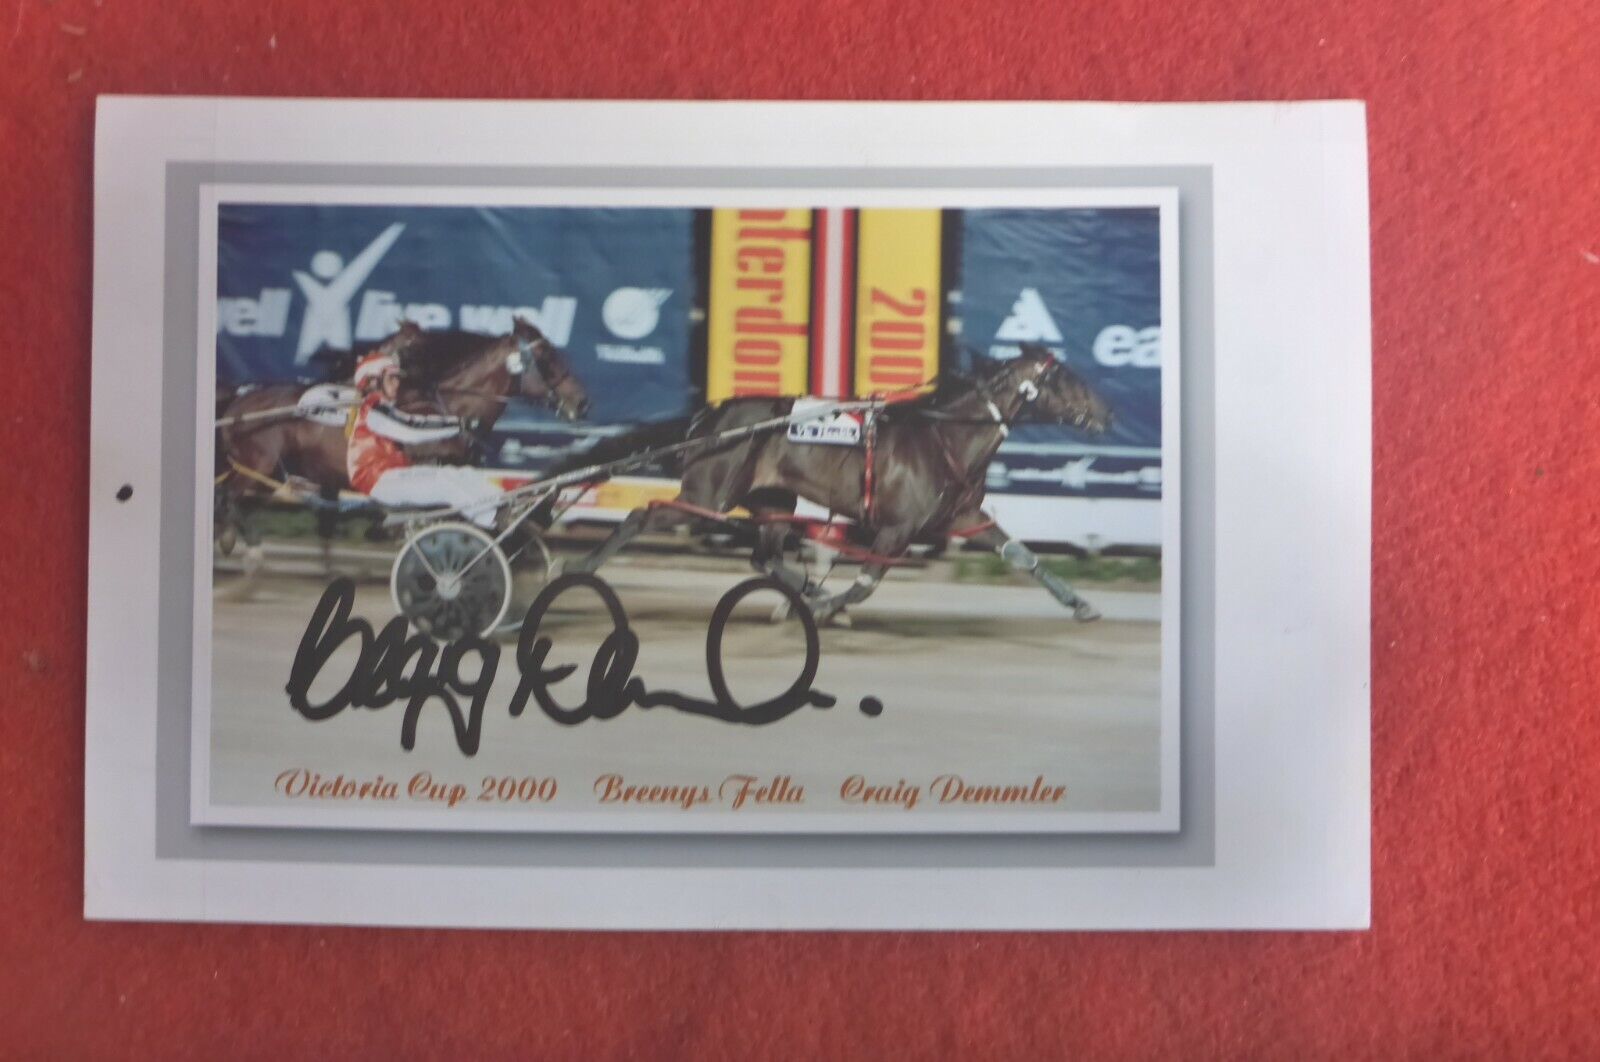 CRAIG DEMLER HAND SIGNED  2000 VICTORIA CUP HARNESS RACING PHOTO 6X4